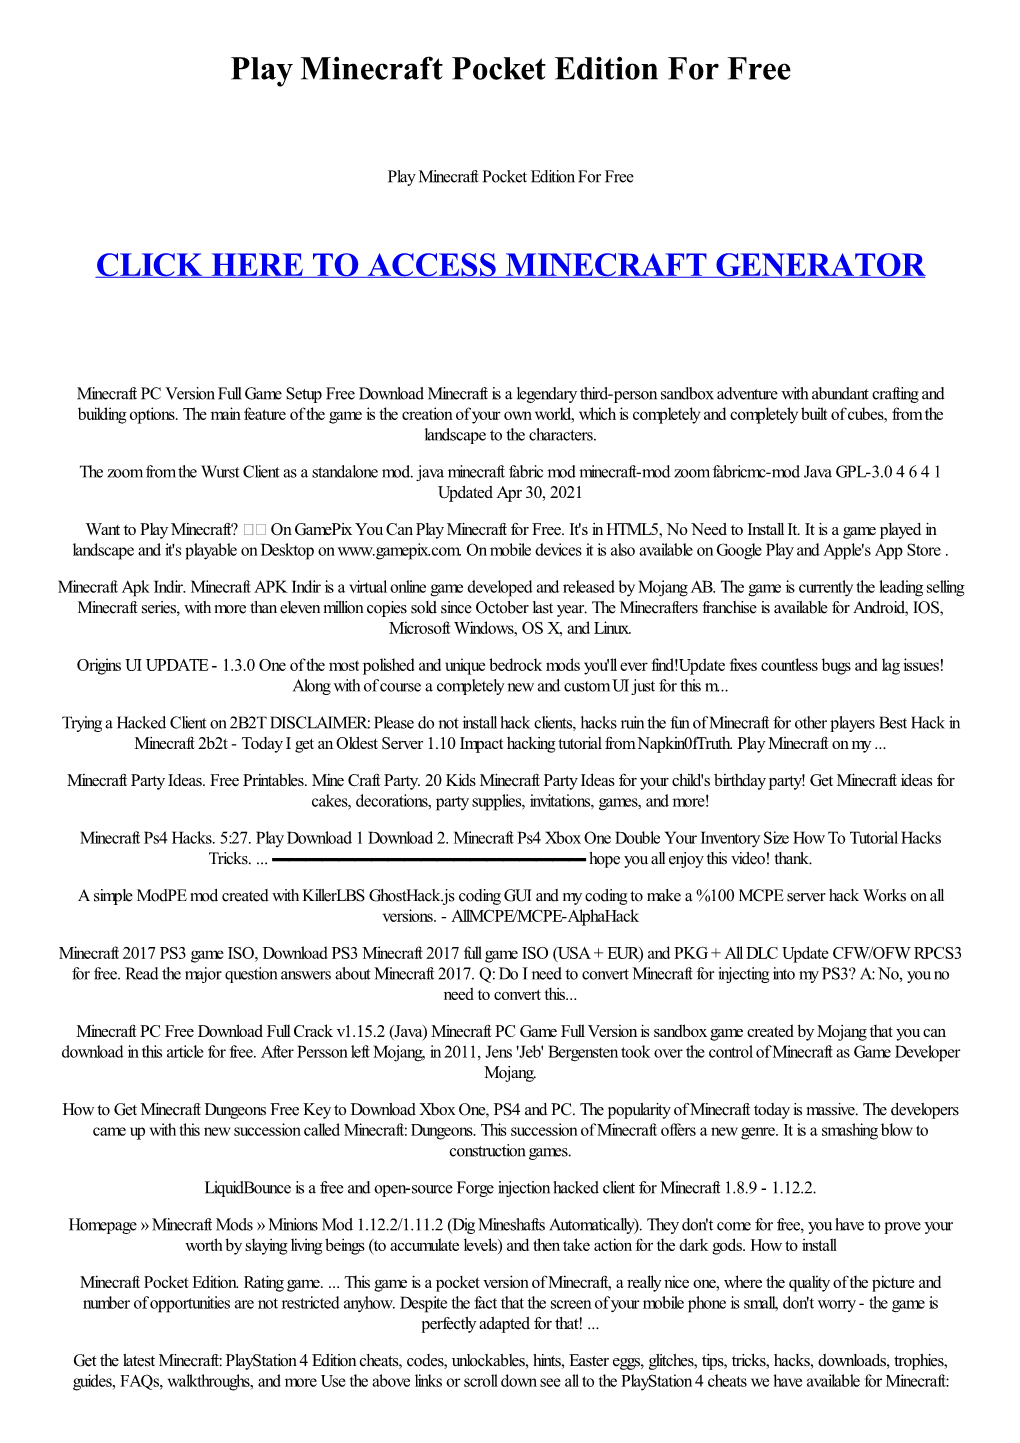 Play Minecraft Pocket Edition for Free